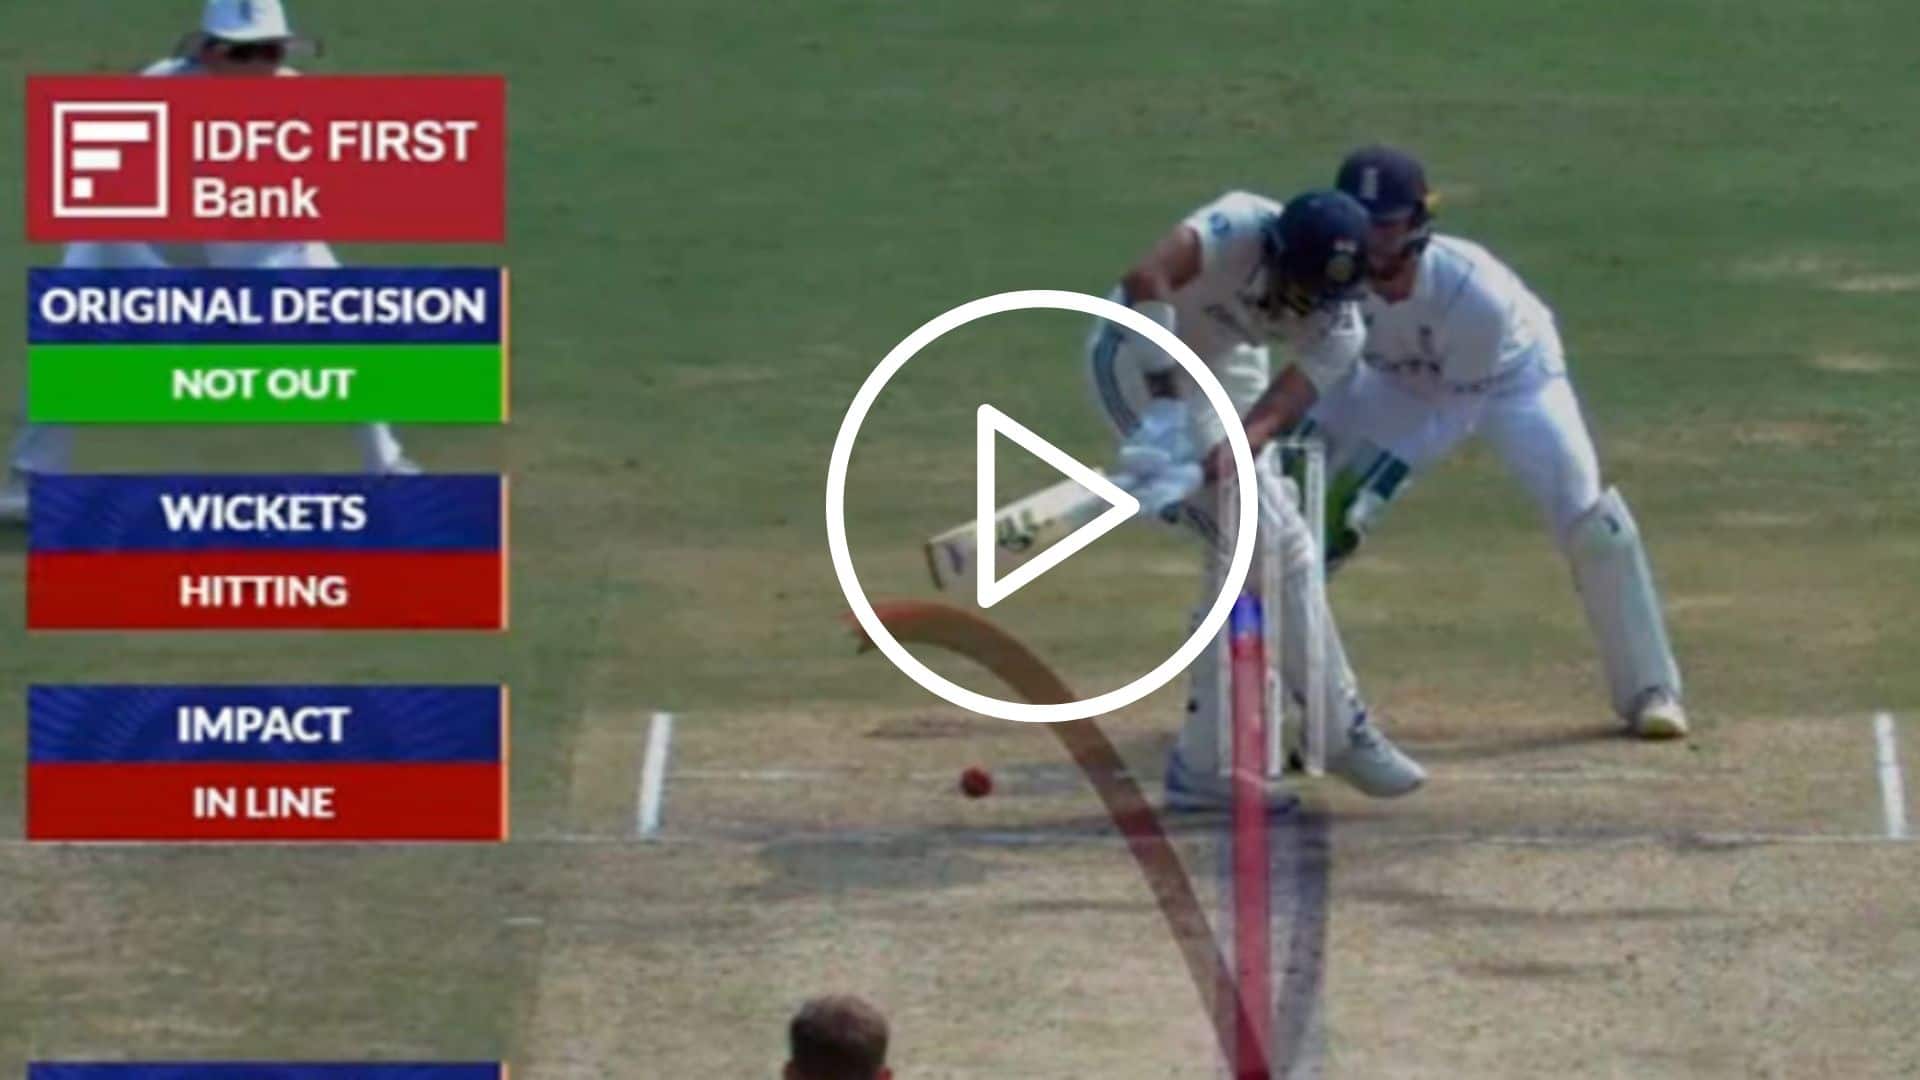 [Watch] Axar Patel Falls After 'Low-Bounce' From Tom Hartley Leaves Him Clueless